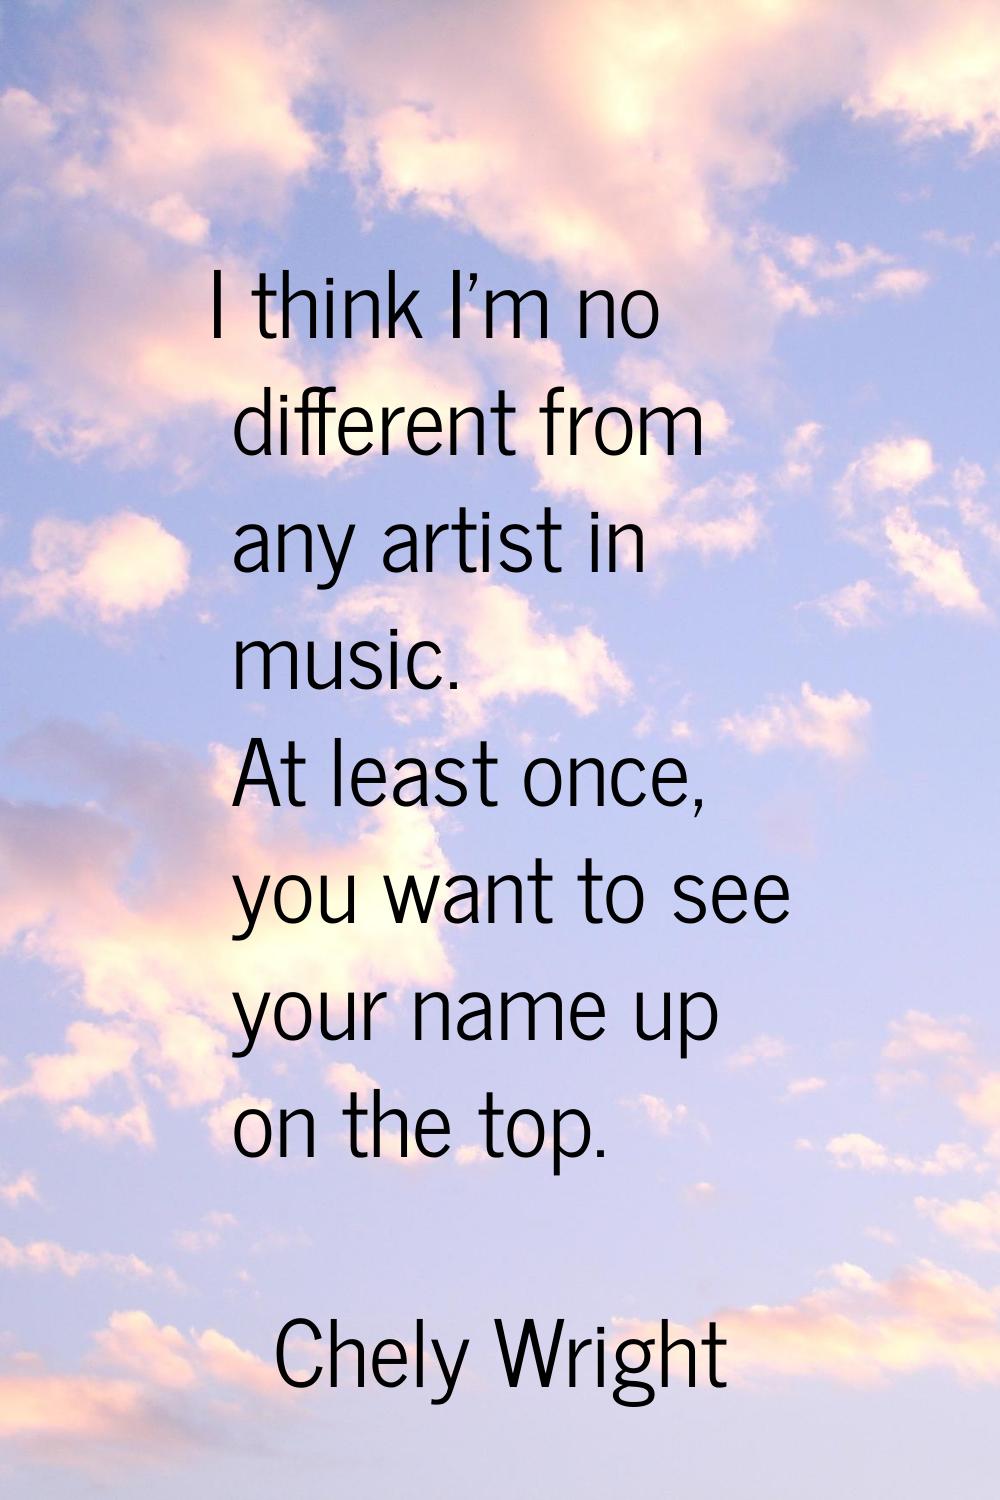 I think I'm no different from any artist in music. At least once, you want to see your name up on t